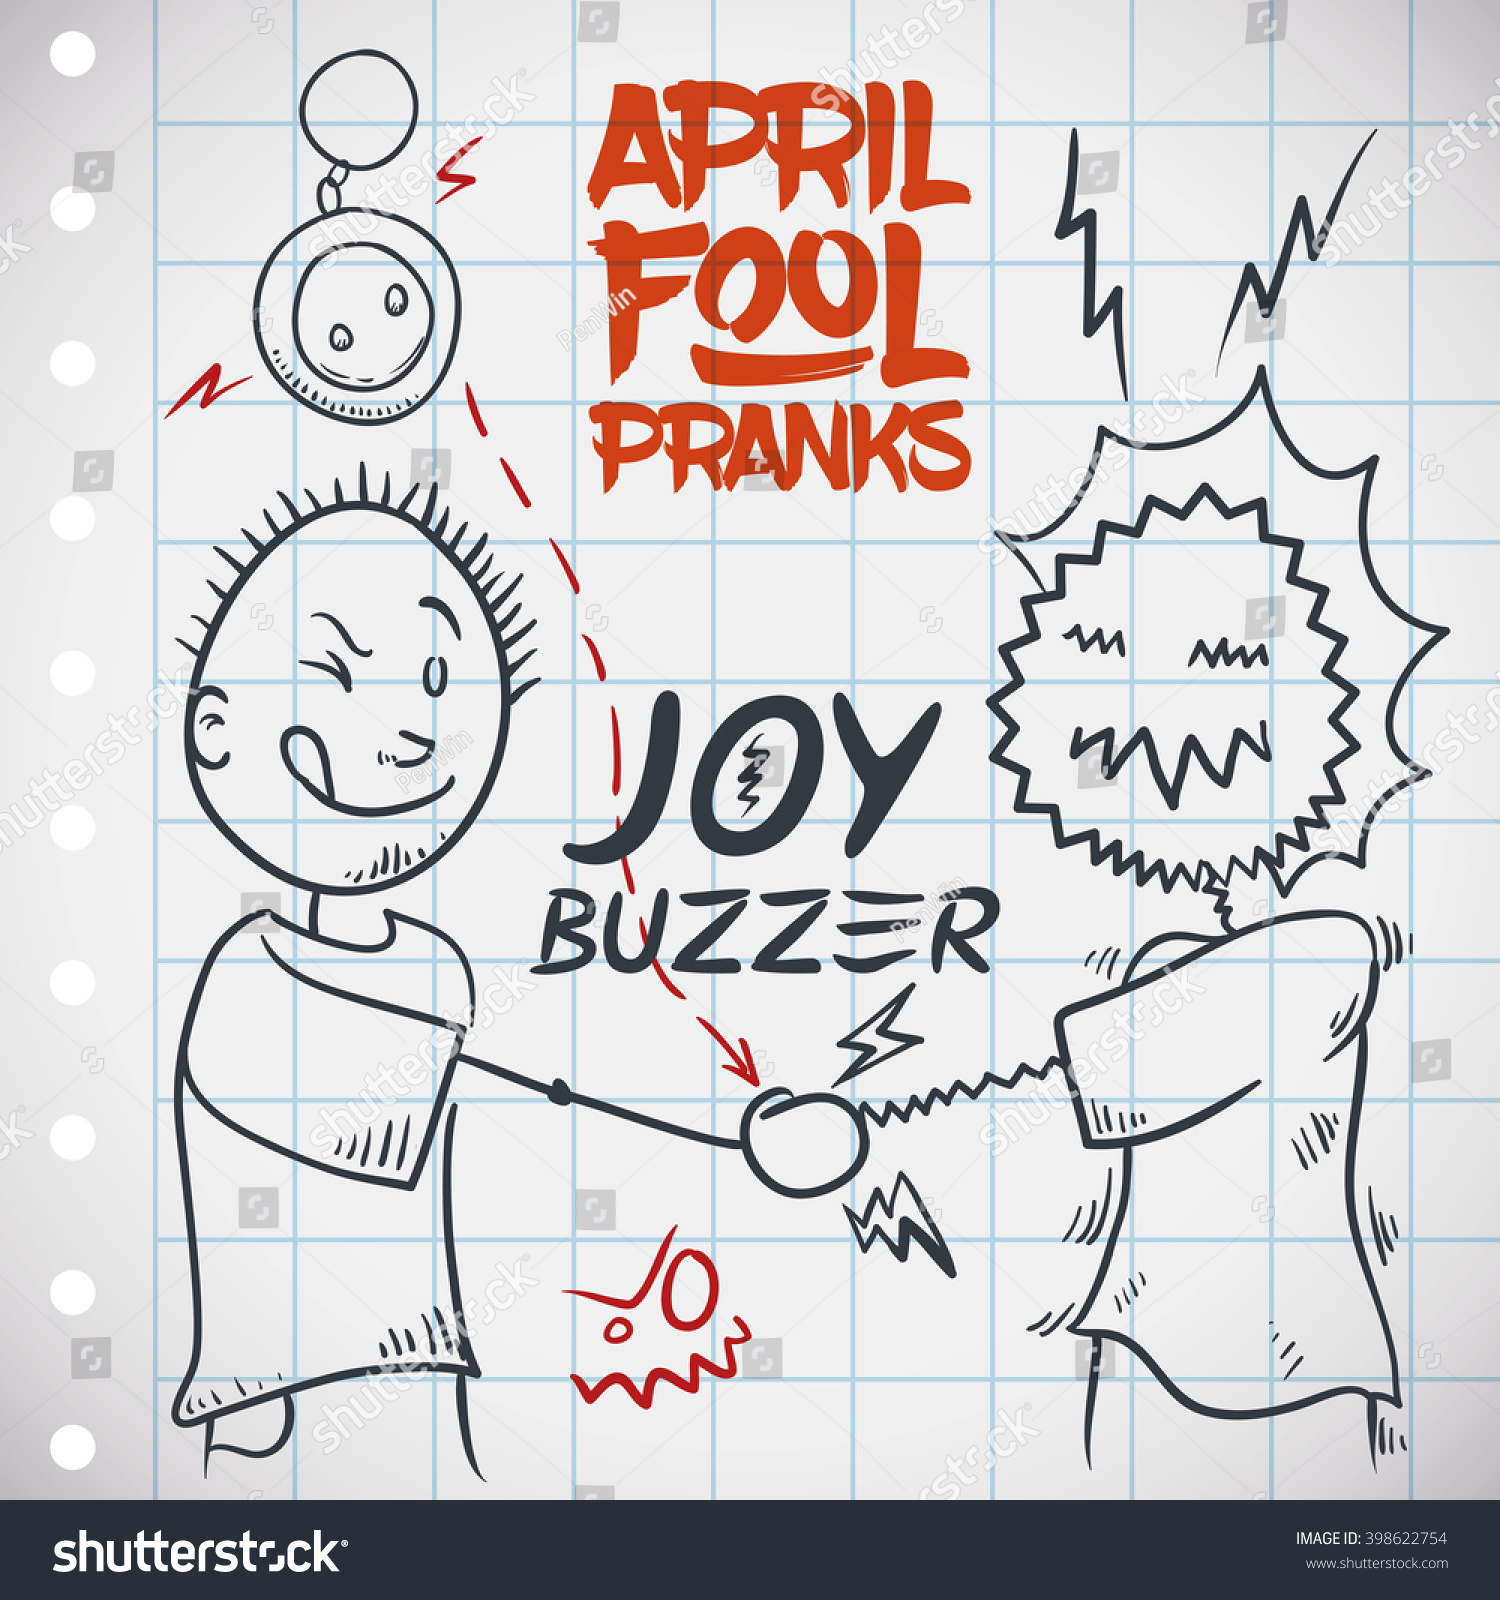 Funny joy buzzer prank for April Fools Day with a draw of a man being